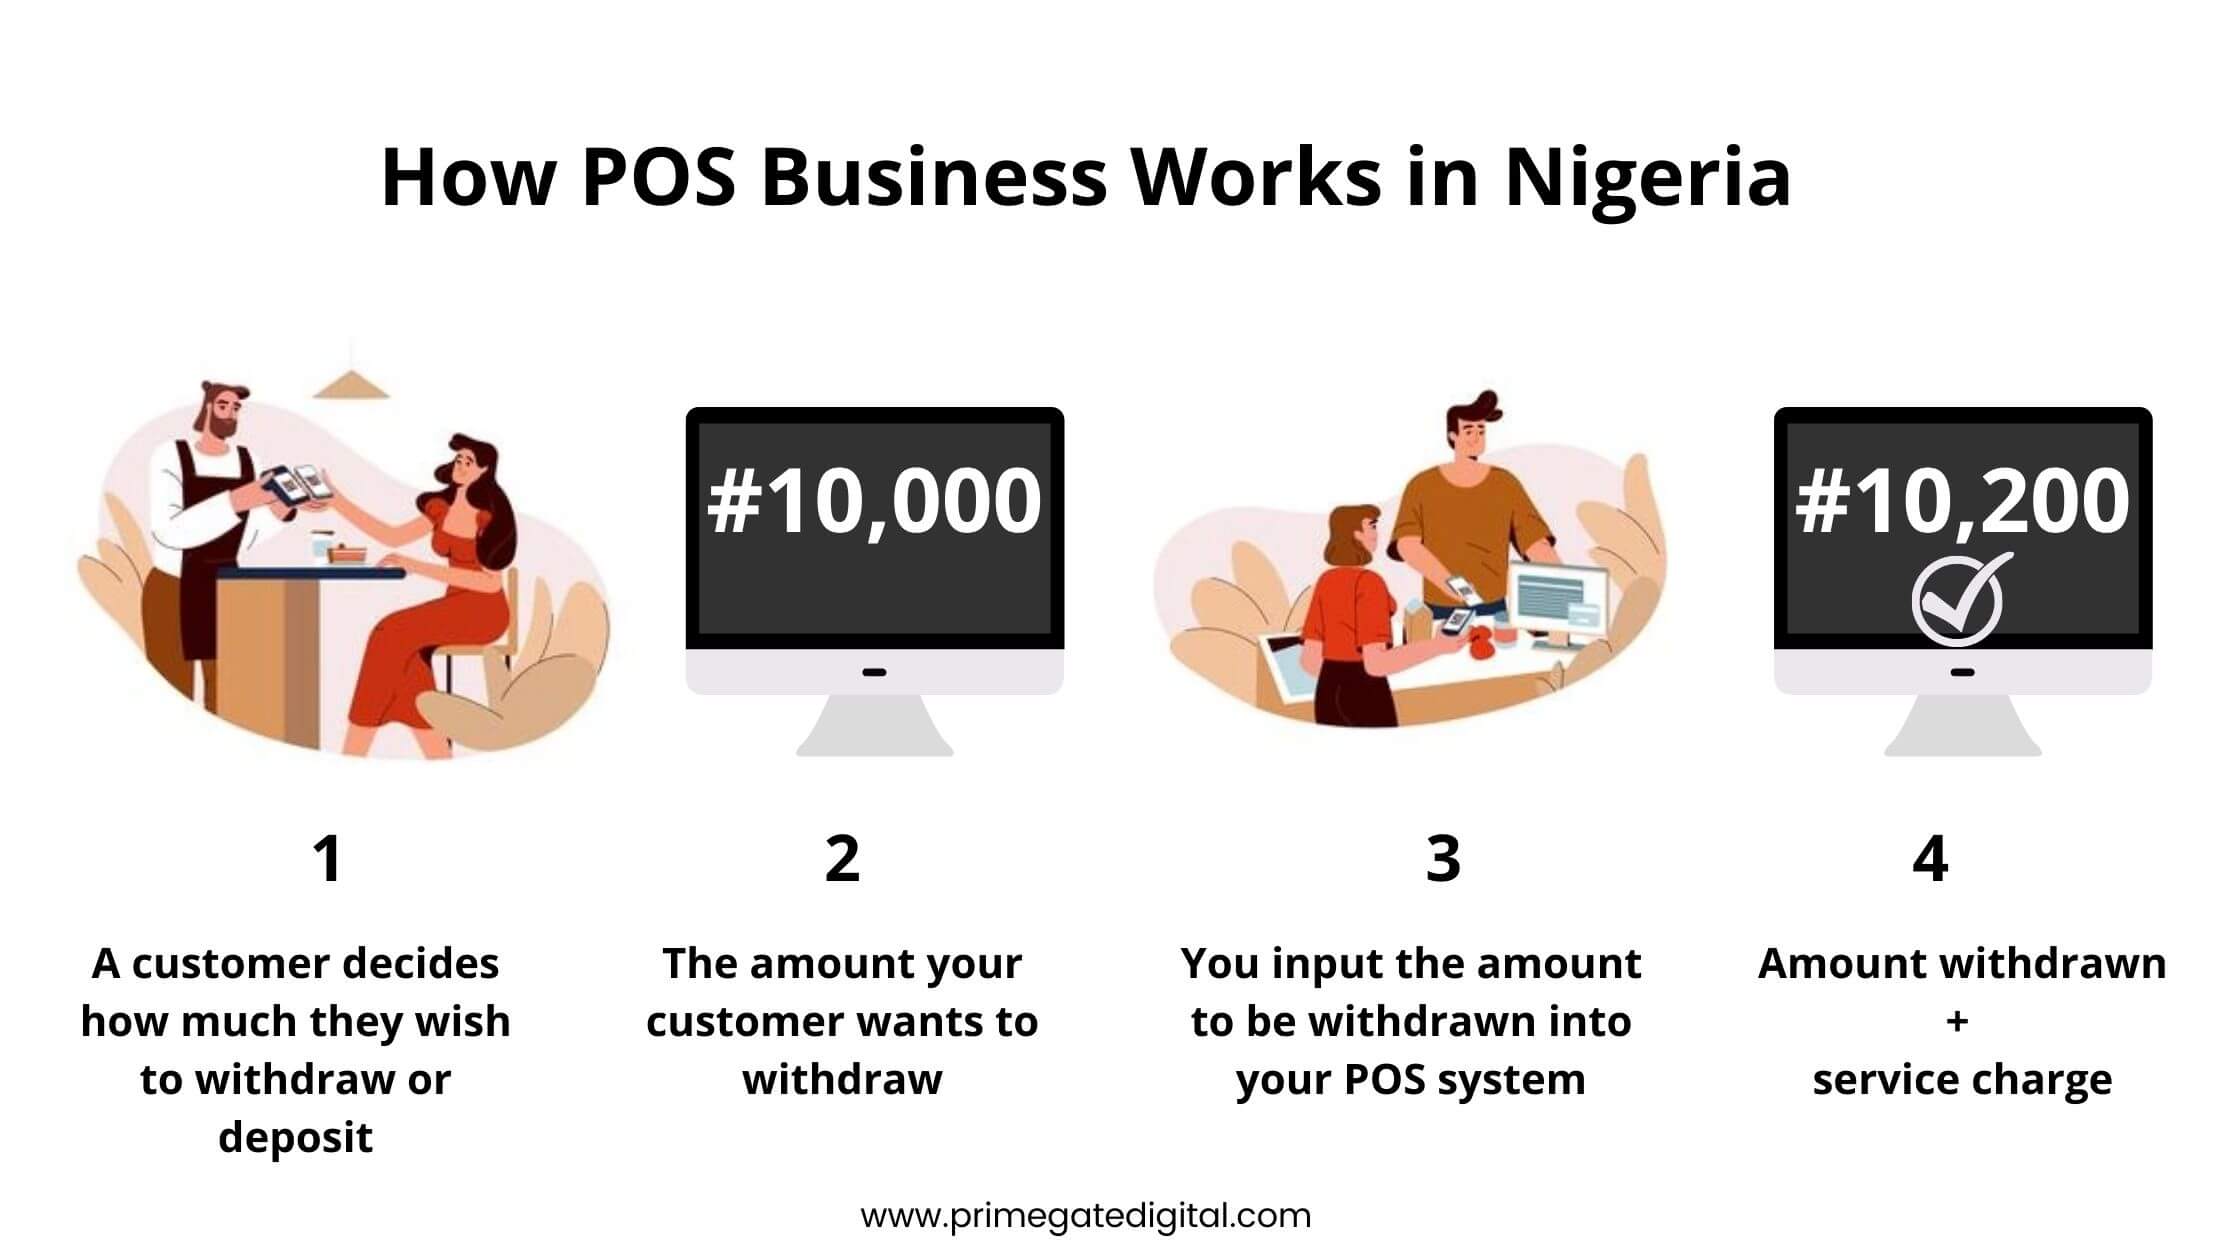 How POS business works in Nigeria